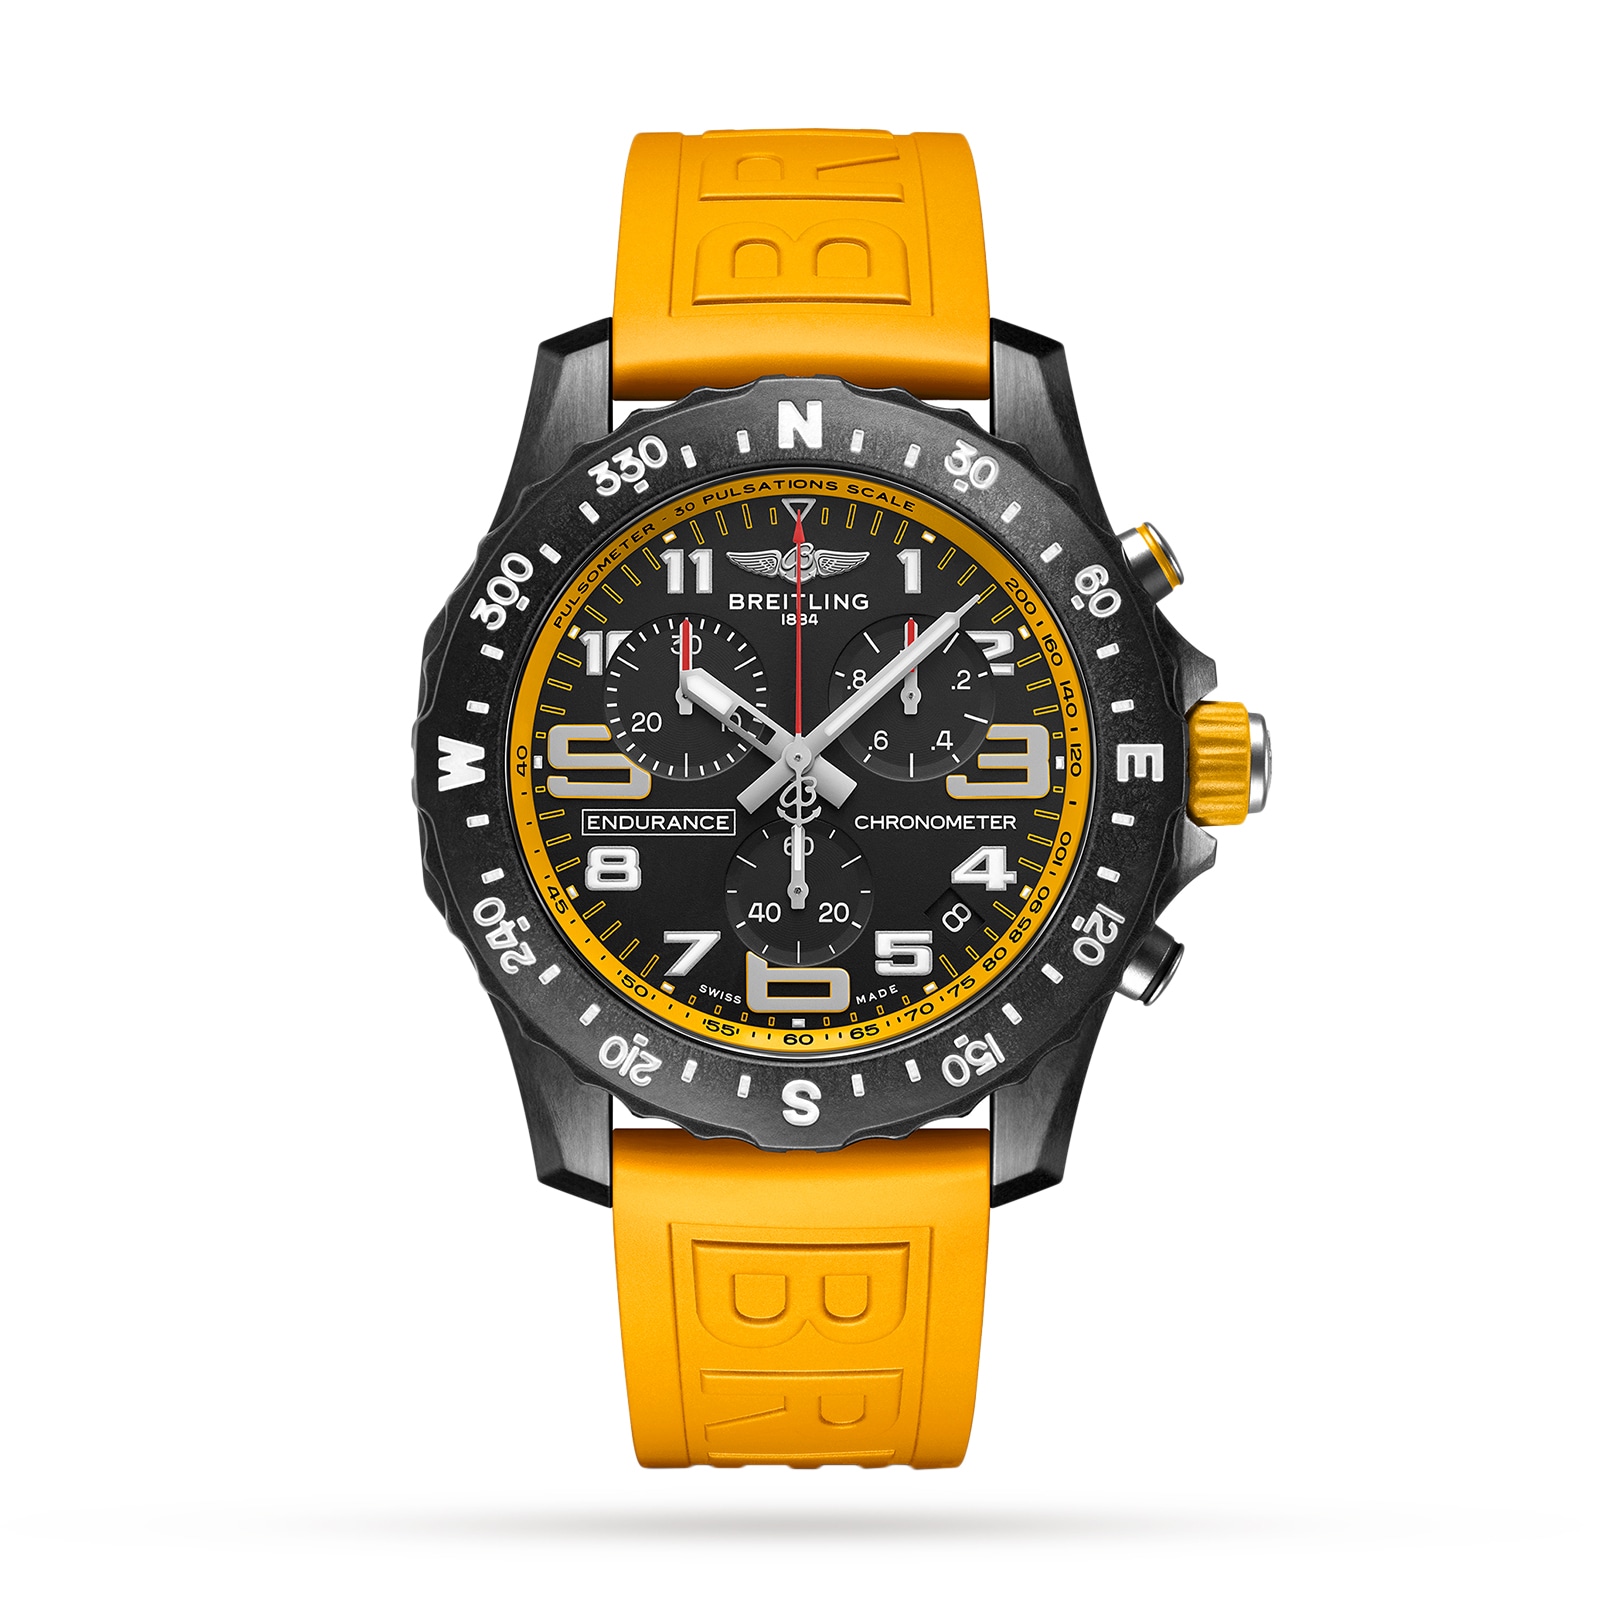 Breitling Endurance Pro 44 Yellow Rubber Strap Watch X82310A41B1S1 ...